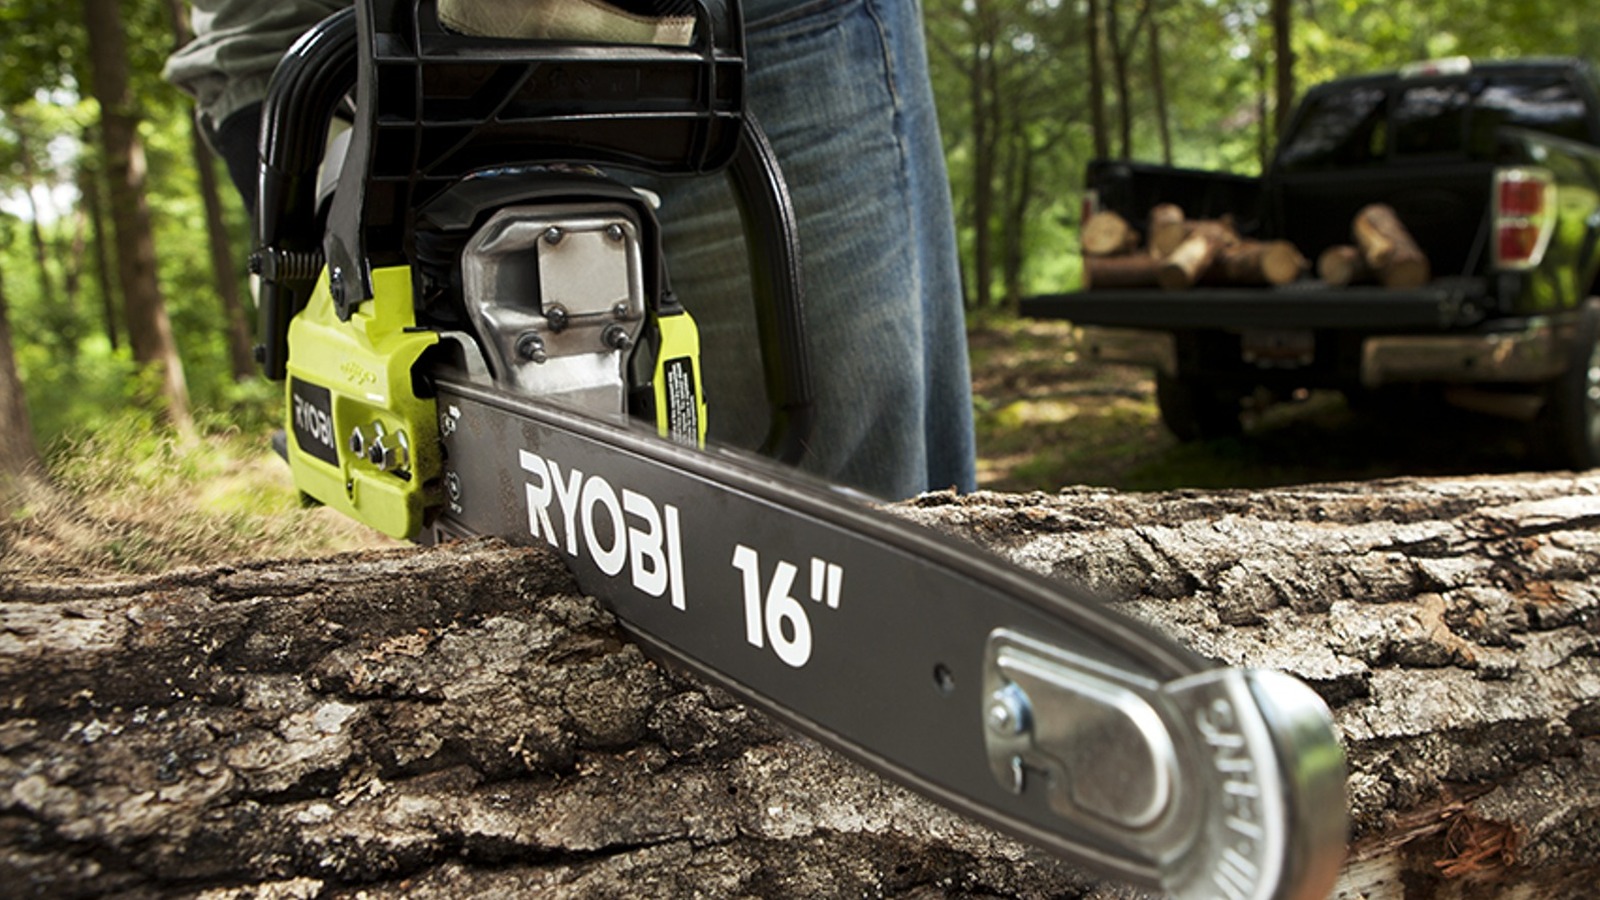 What Is The Correct Fuel Ratio For A Ryobi Chainsaw?